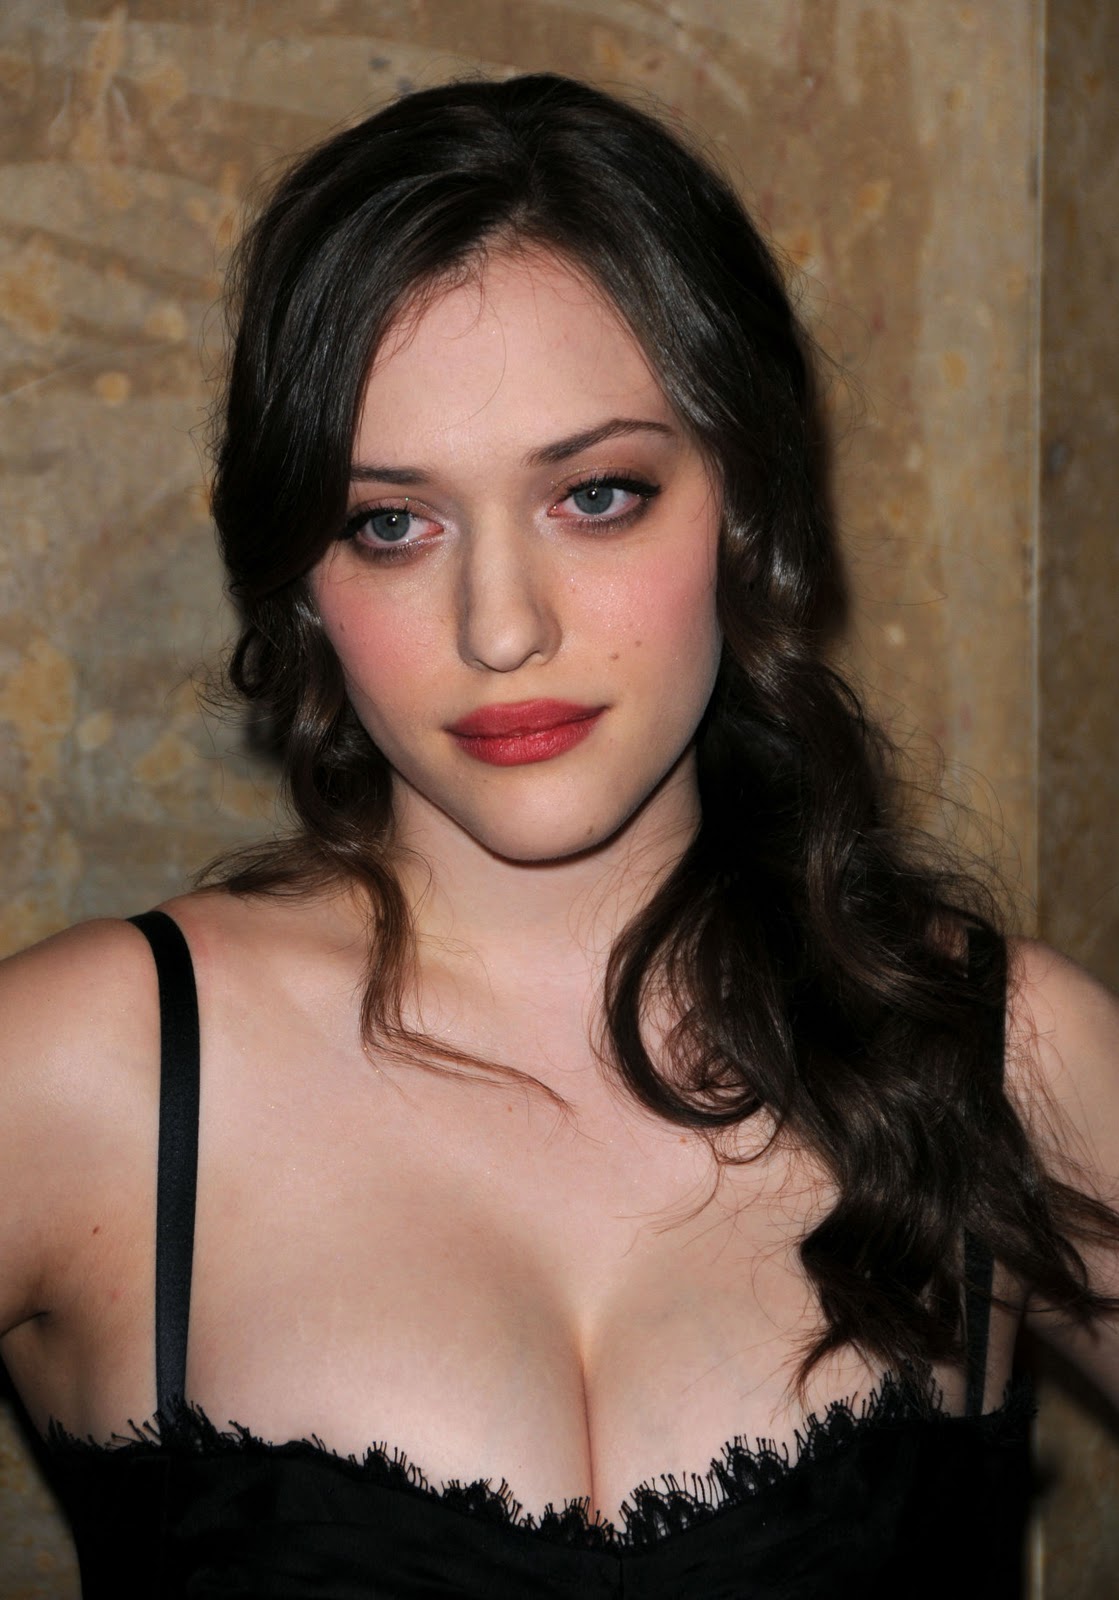 Kat Dennings self shots leaked | The Hottes - Breaking News